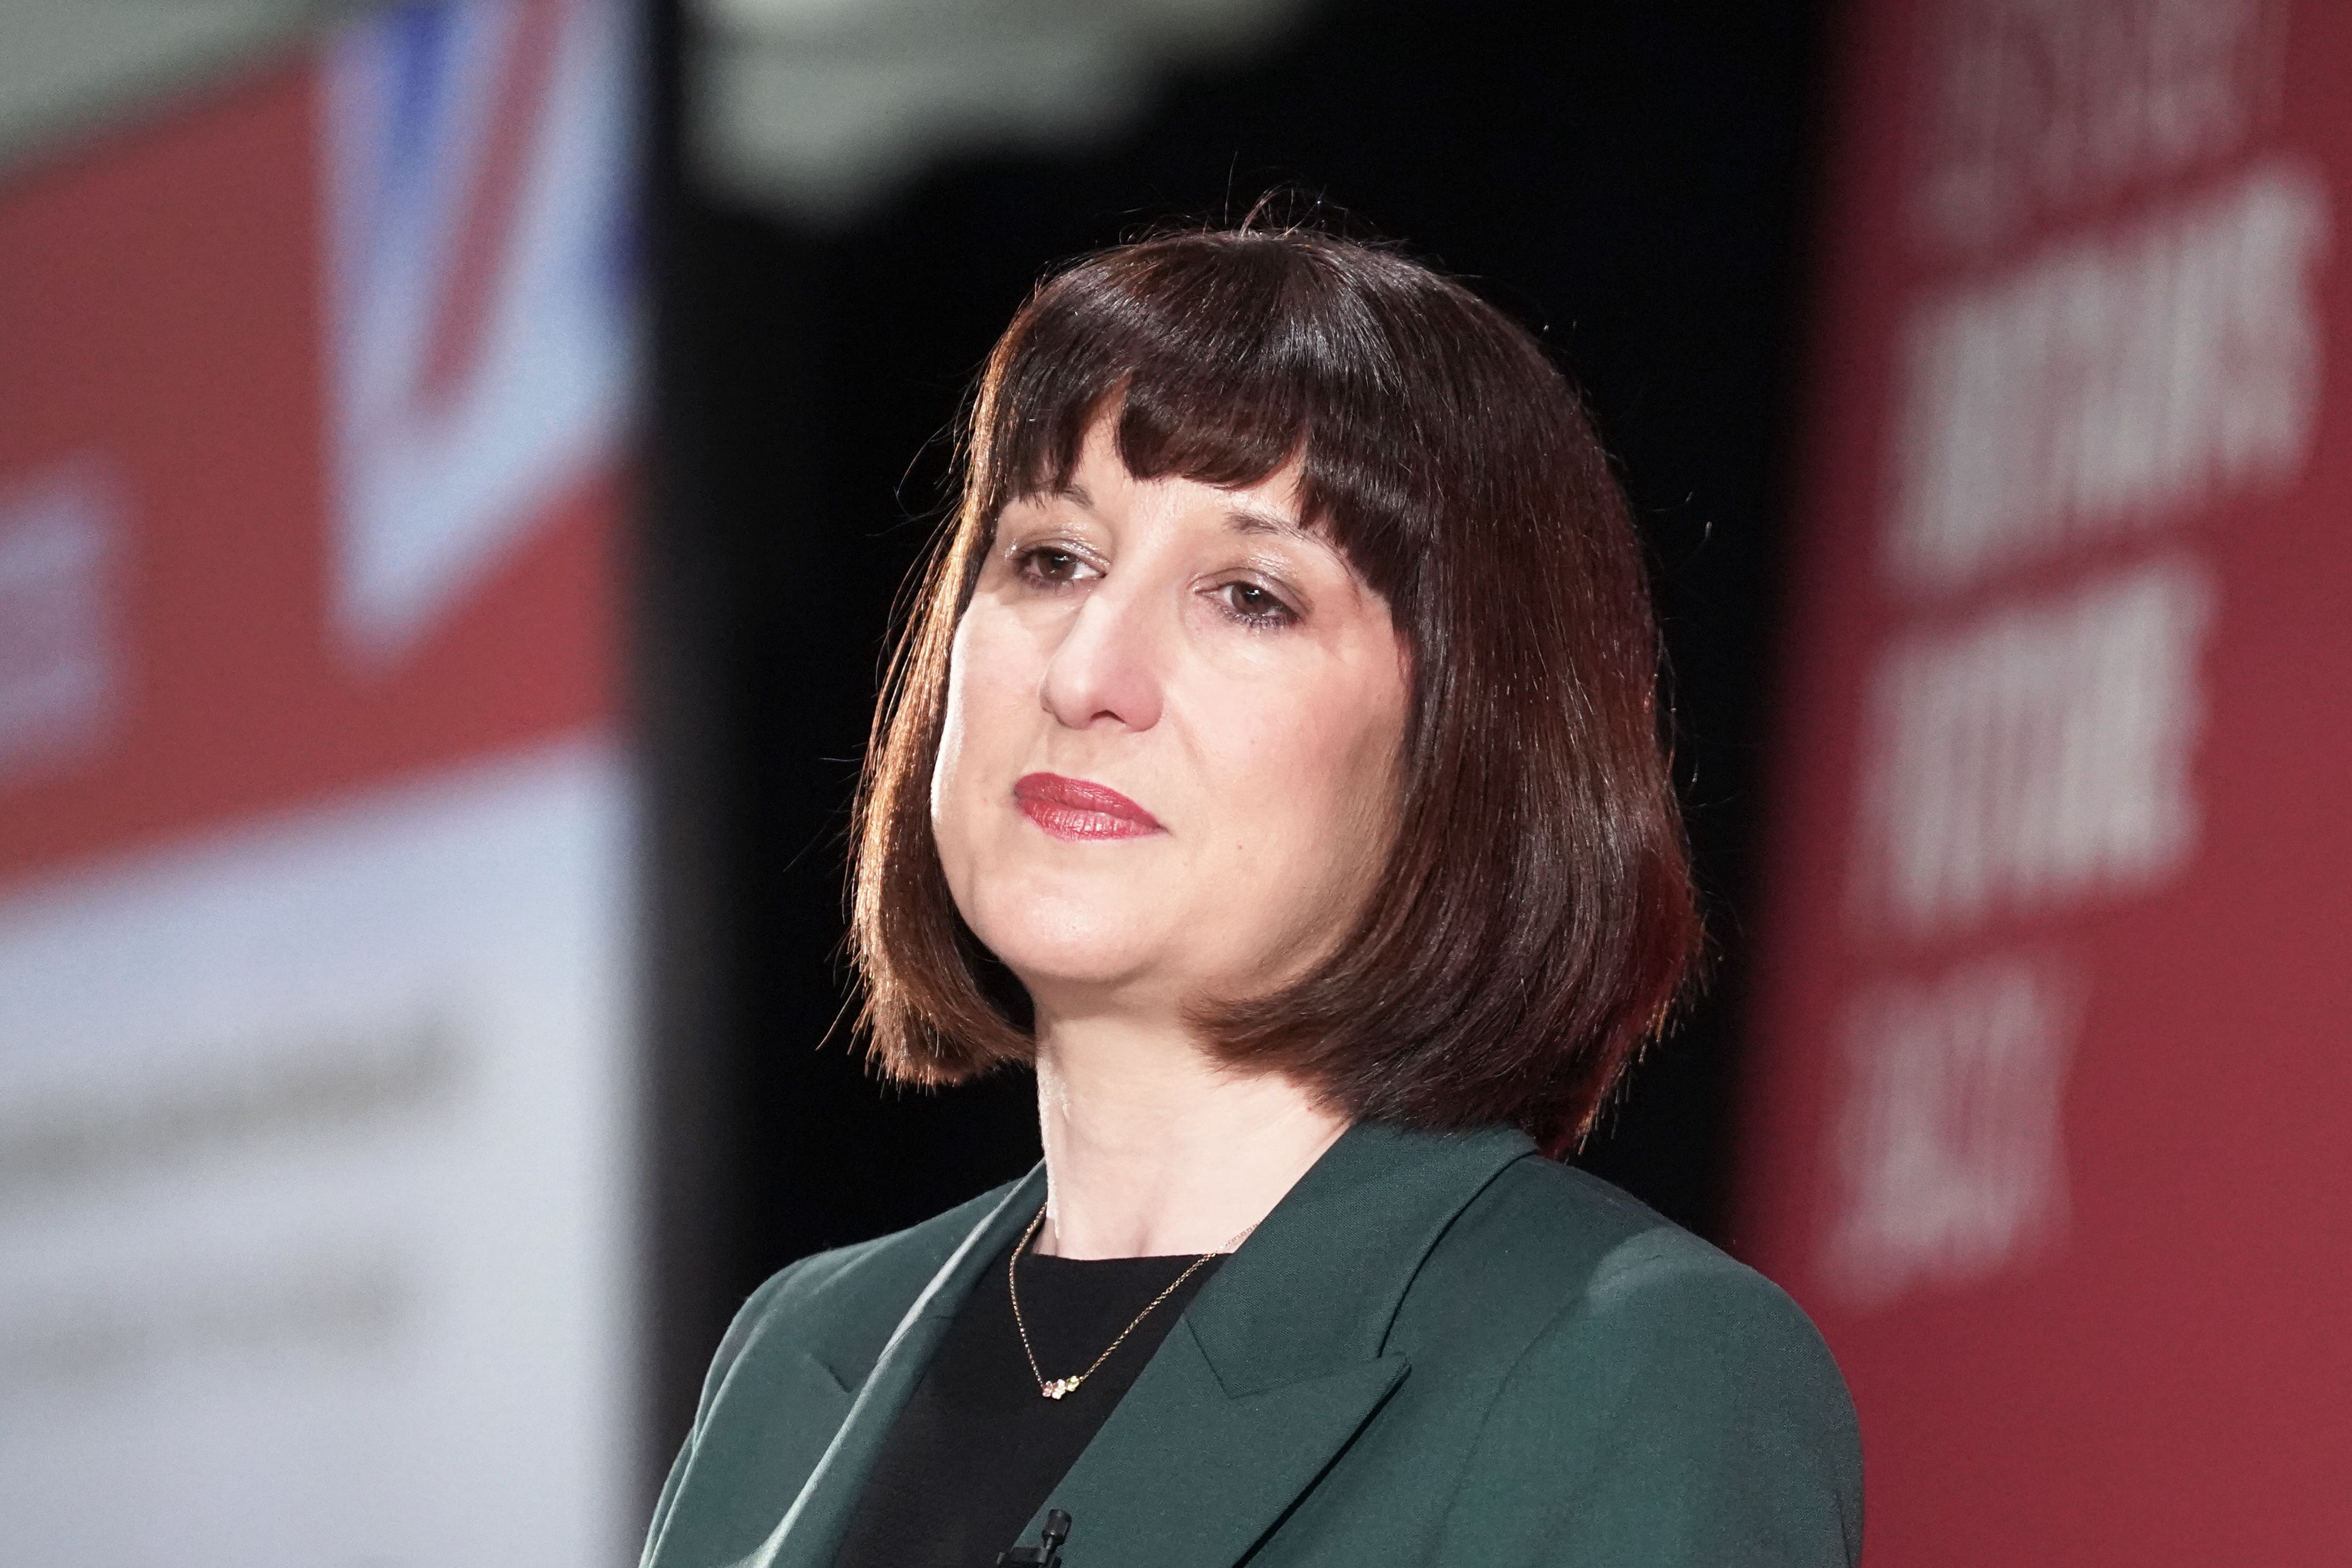 Shadow chancellor Rachel Reeves will provide some insights into her political ambitions in her lecture this evening